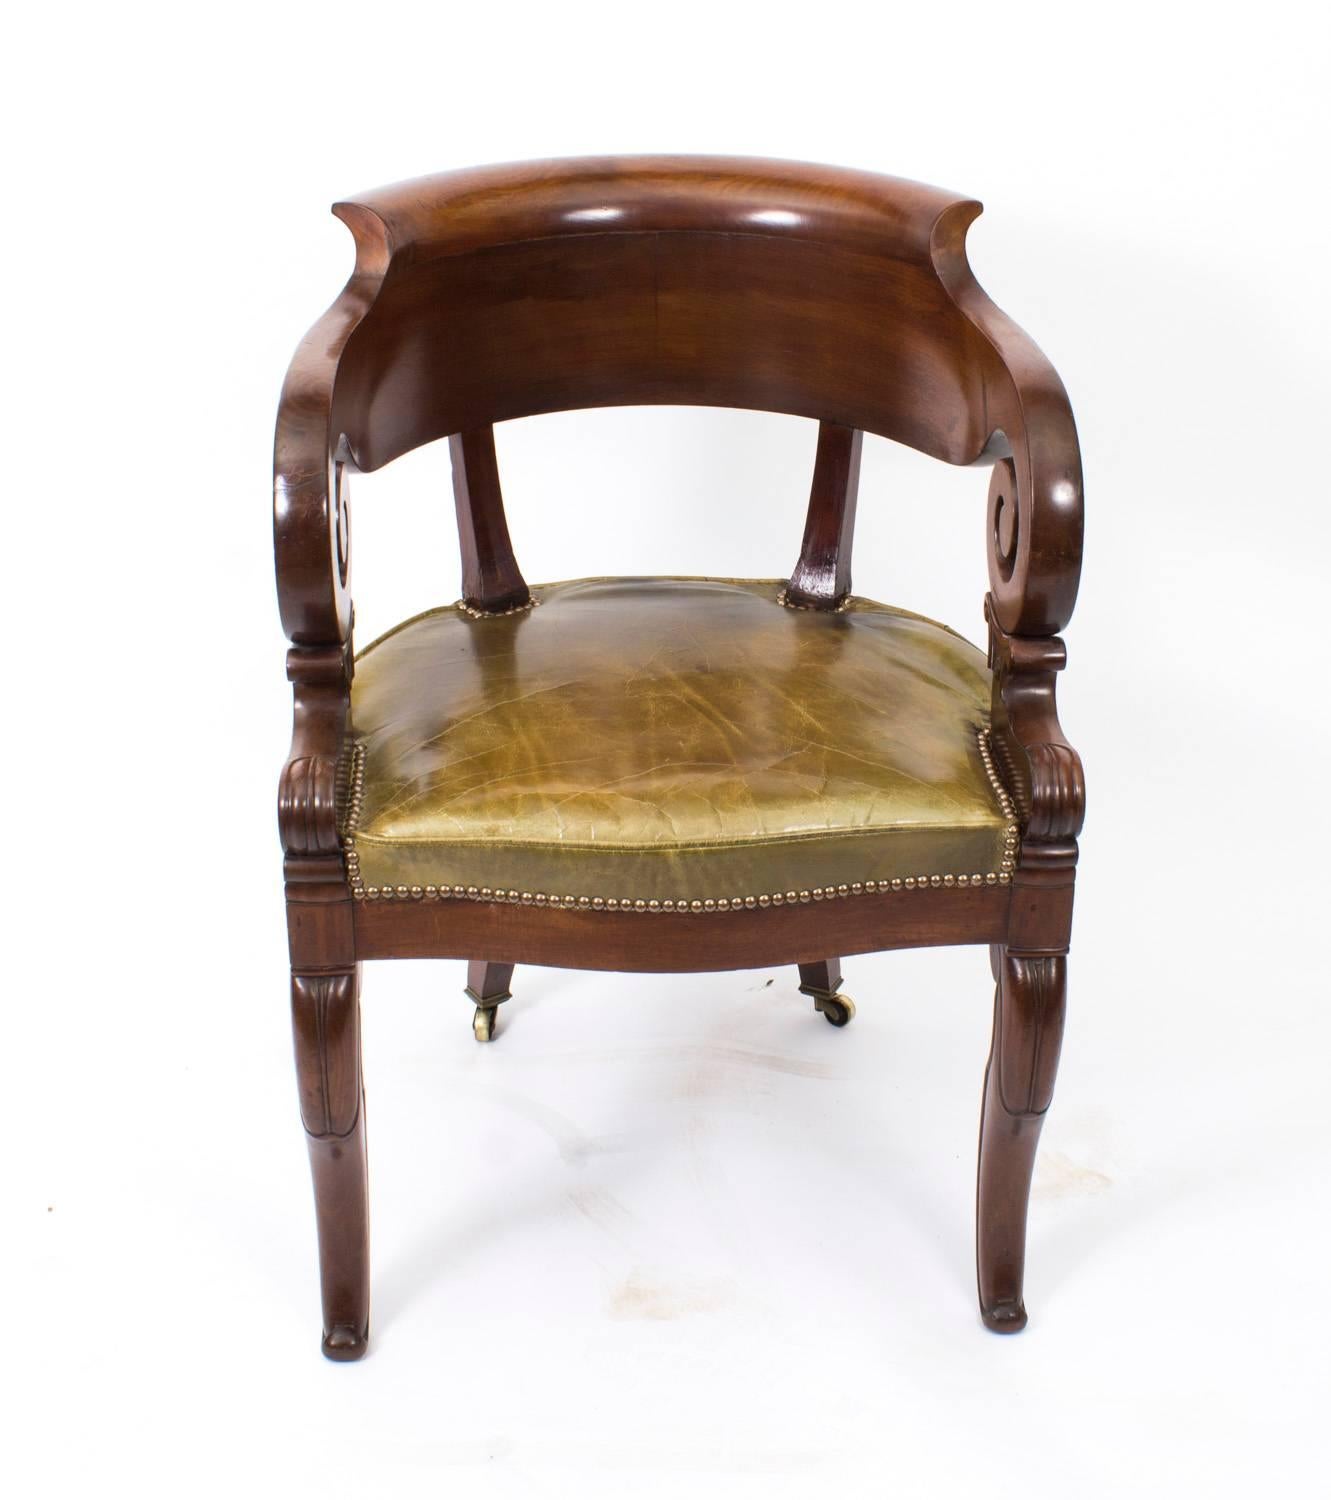 This is a spectacular Empire tub back desk chair, circa 1820 in date.

This comfortable desk chair is made of solid mahogany and has beautiful curved spiral scroll arms, with a solid curvaceous back. The seat is upholstered in a fabulous sage